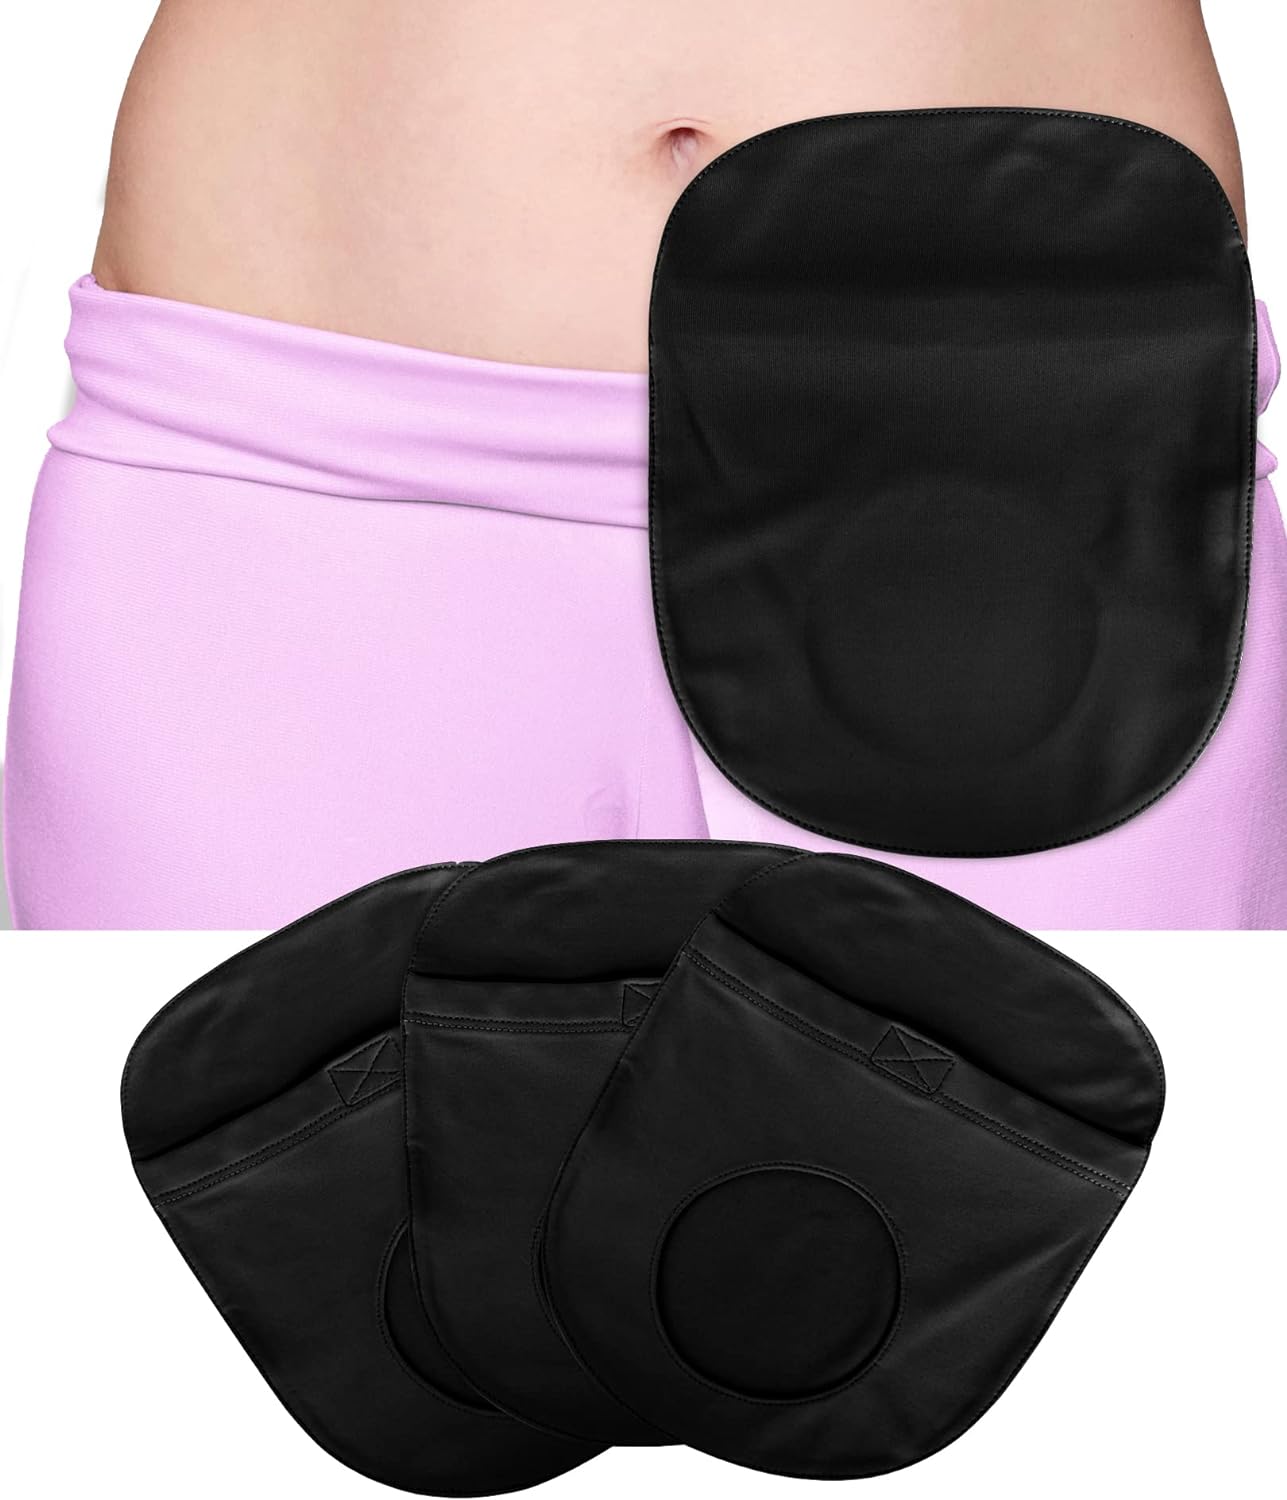 3Pcs Colostomy Bag Cover, Unisex Ostomy Bag Covers for Ostomy Bag Supplies